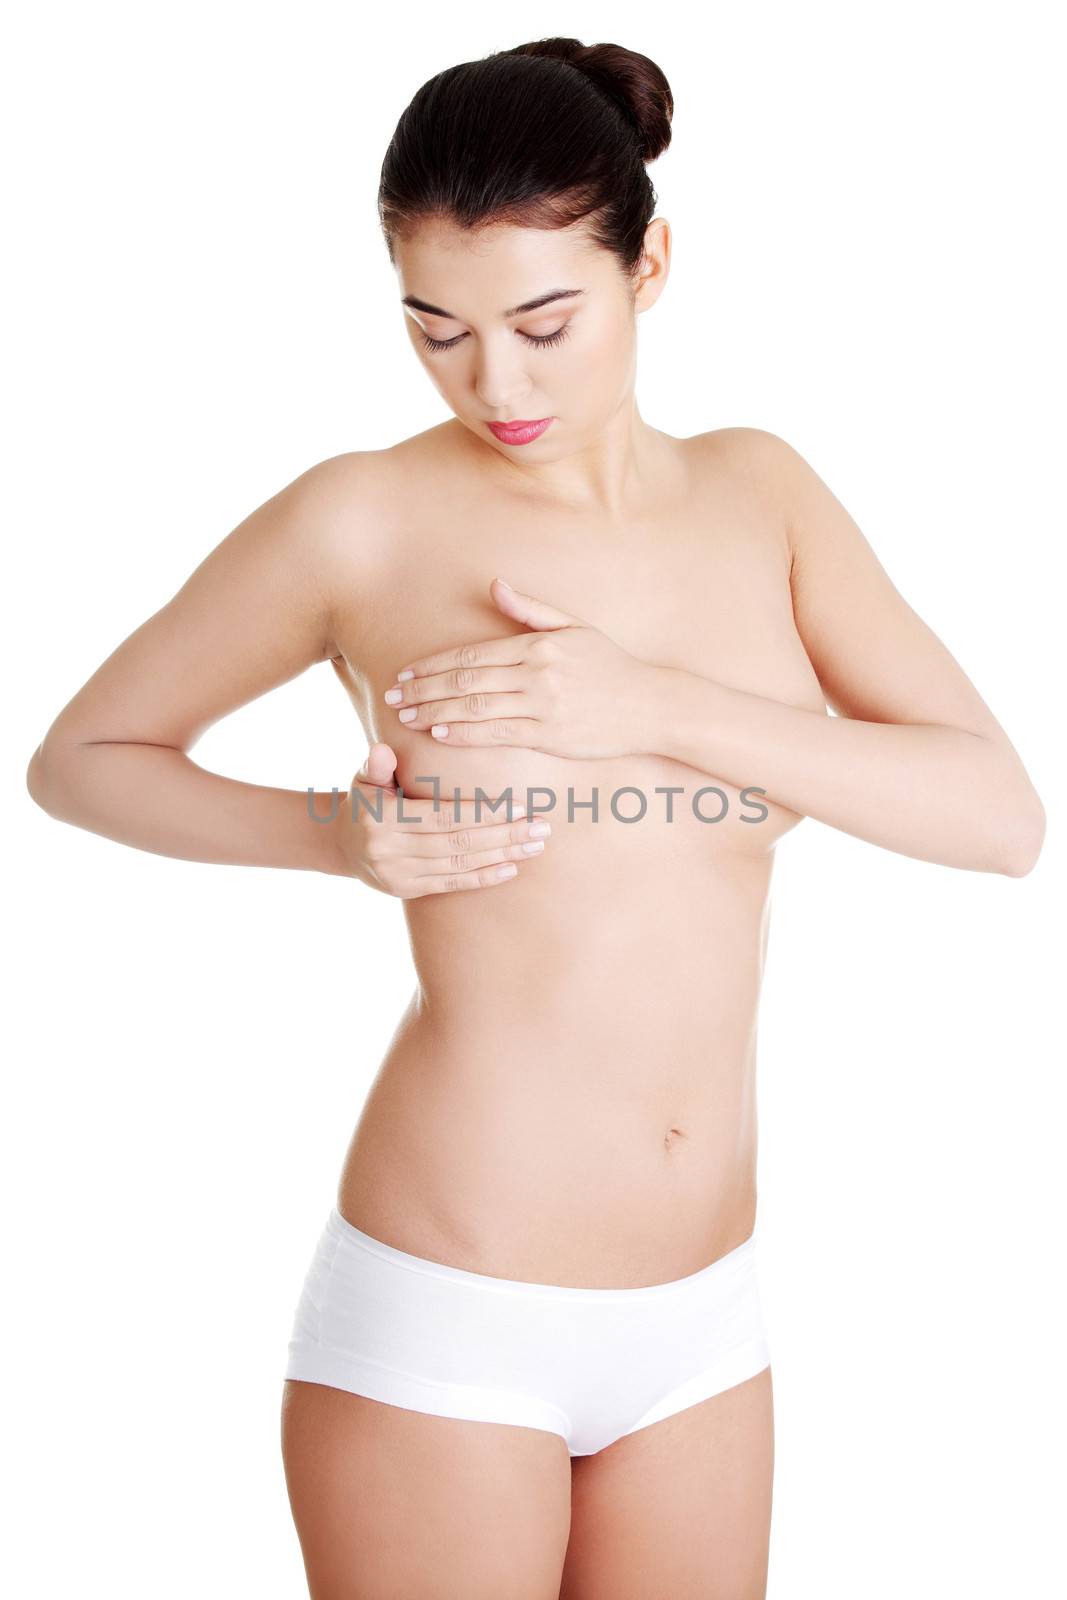 Woman examining breast mastopathy or cancer. Isolated on white